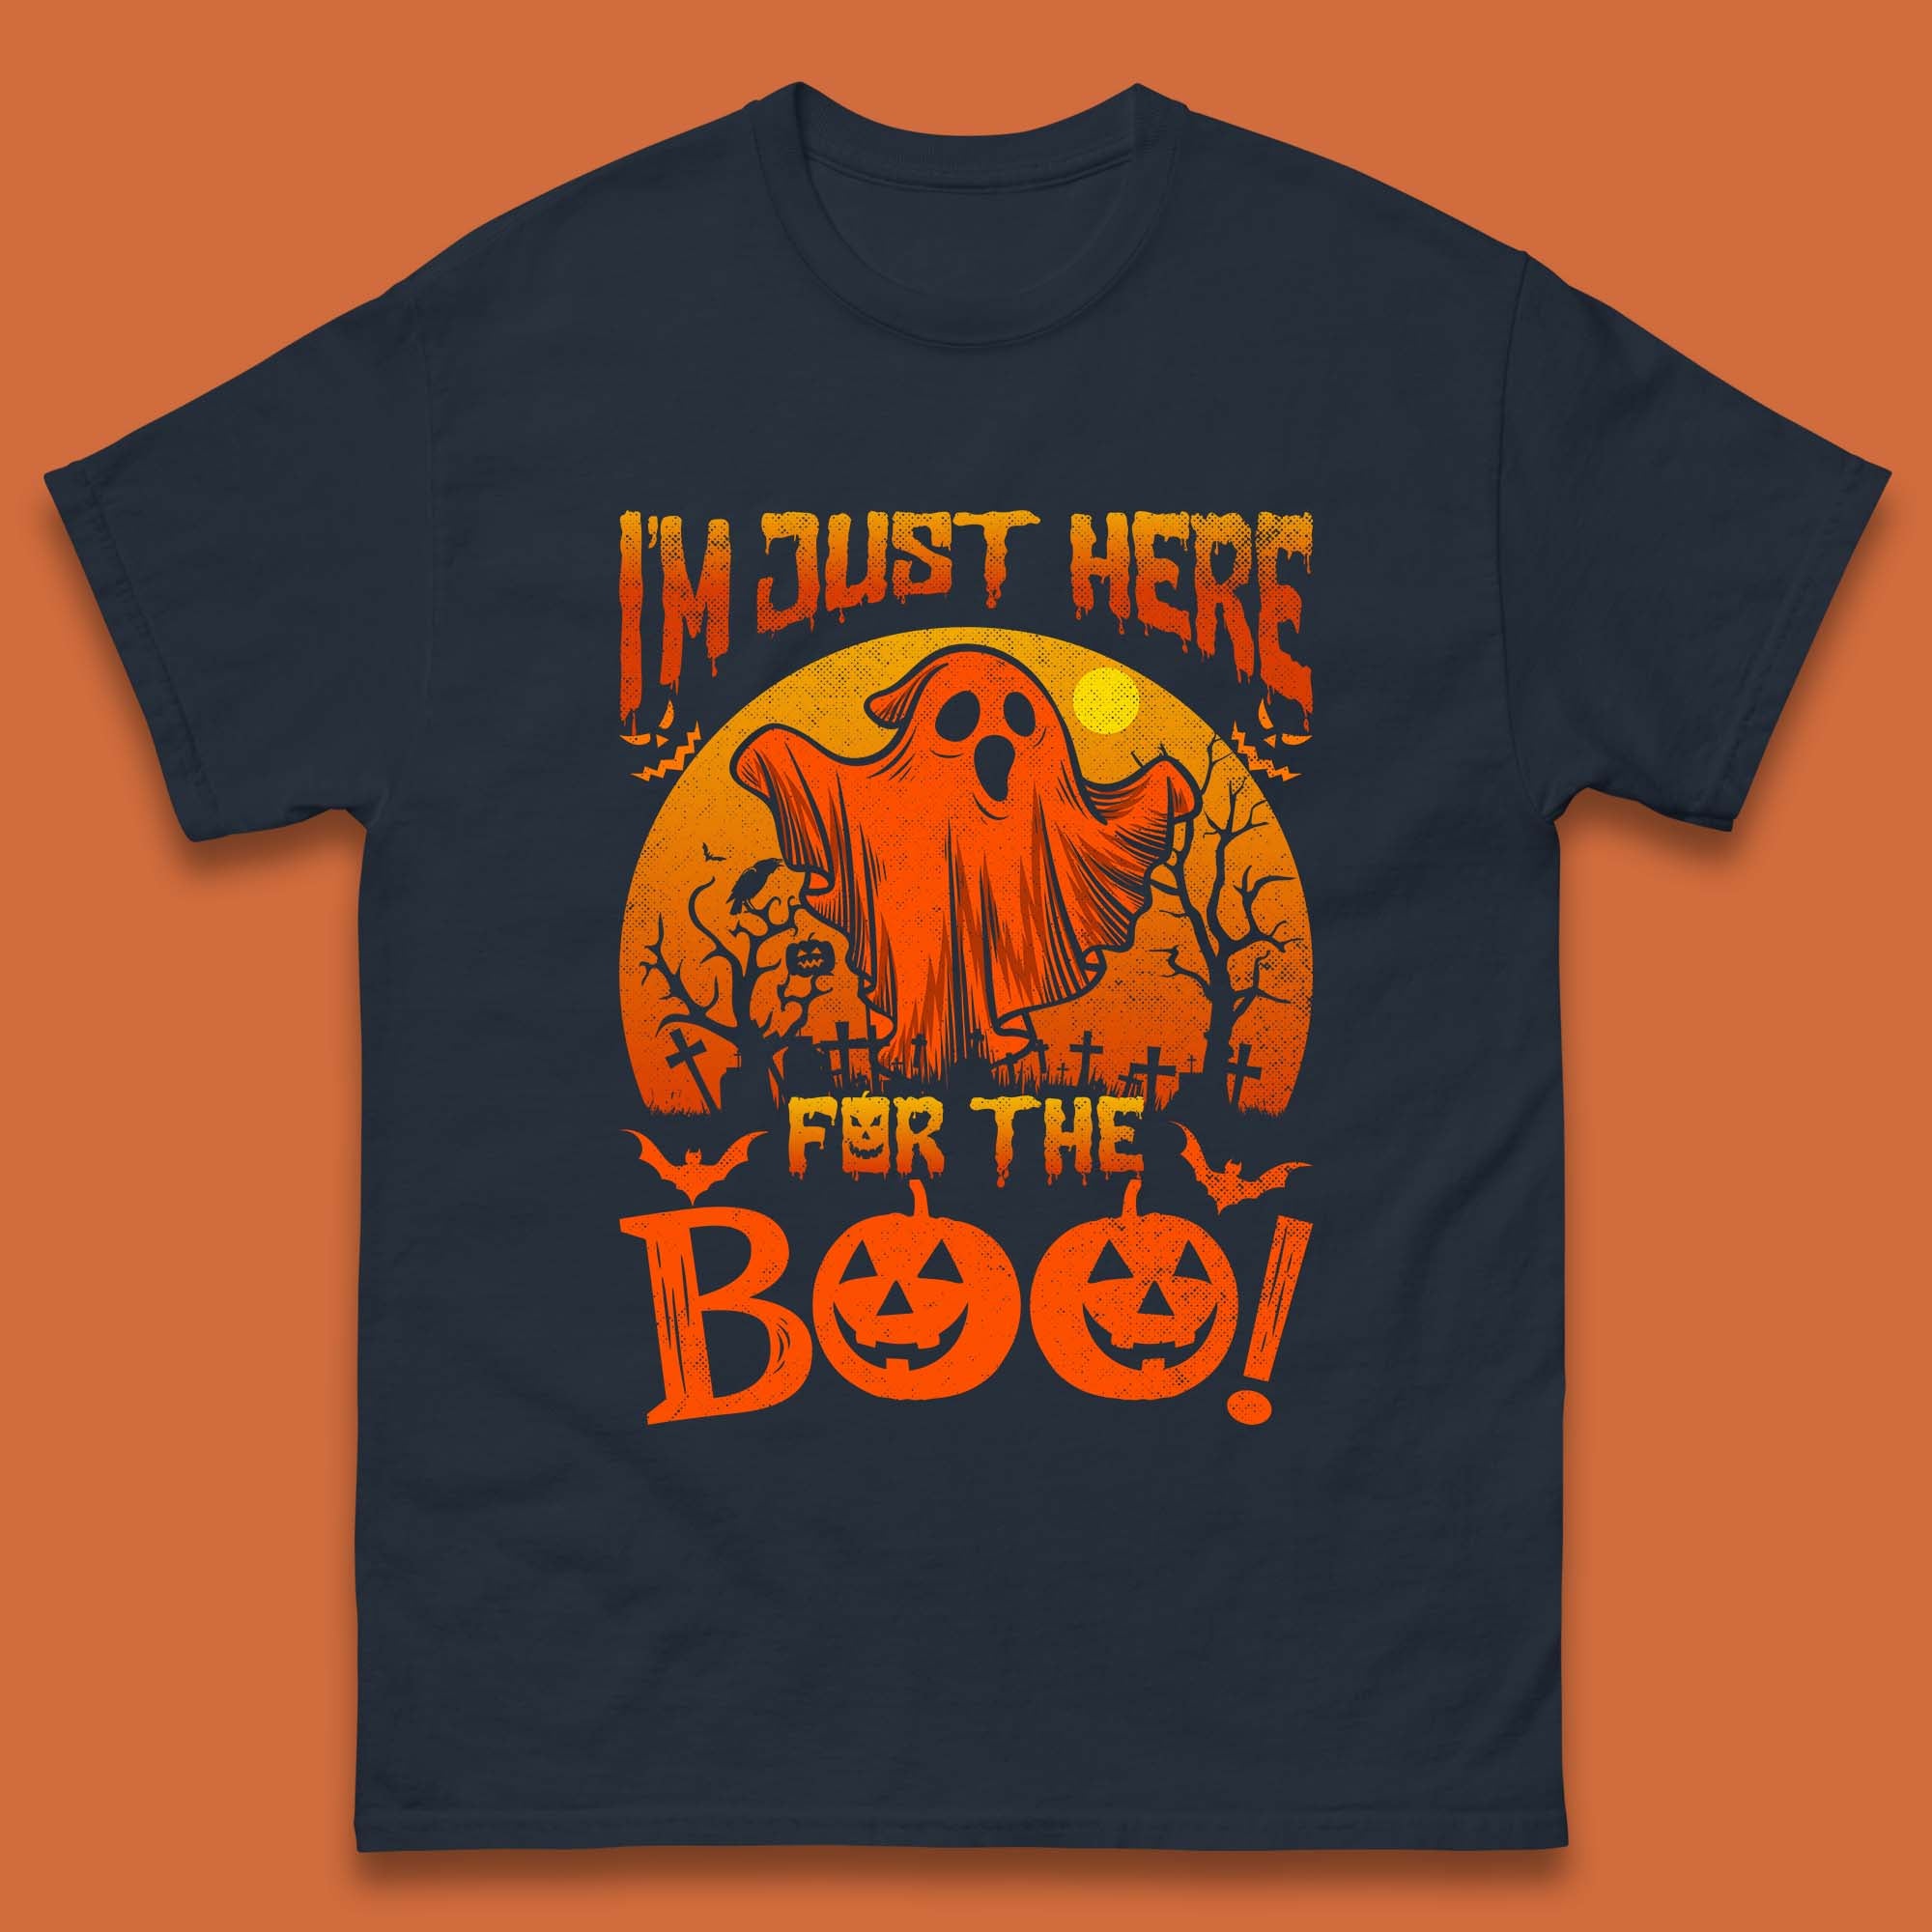 I'm Here For The Boo Halloween Horror Scary Boo Ghost Spooky Season Mens Tee Top